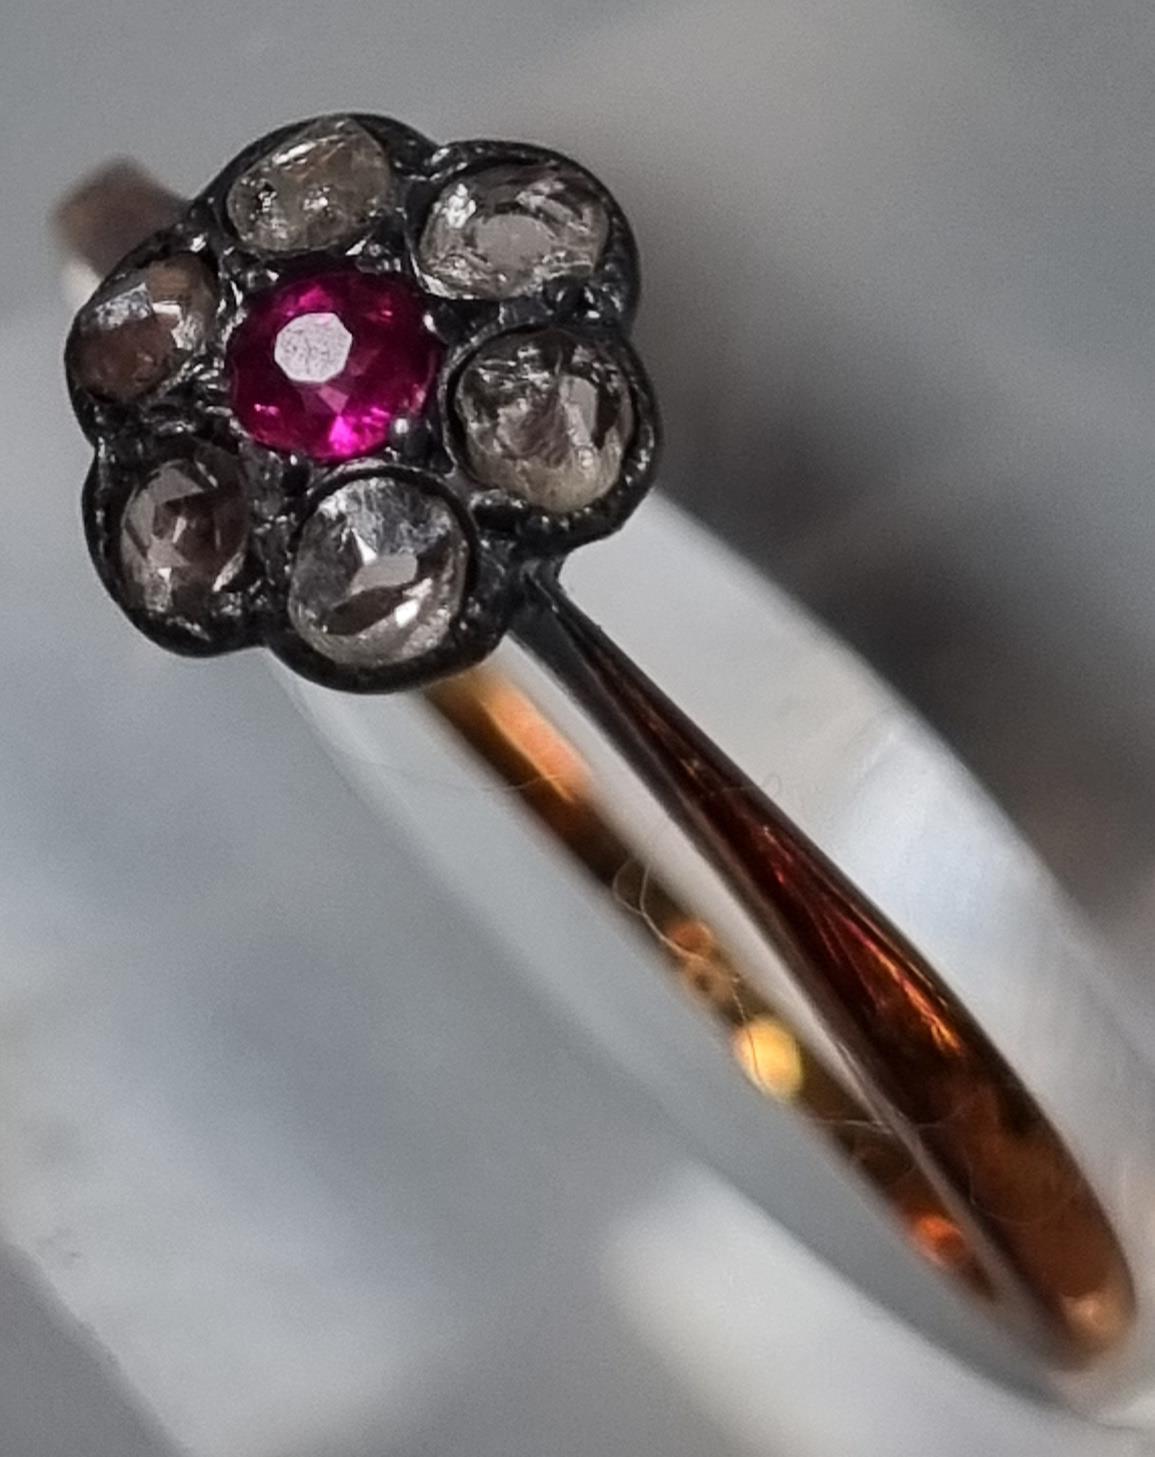 18ct gold diamond and ruby daisy ring. 2g approx. Size M1/2. (B.P. 21% + VAT) - Image 2 of 4